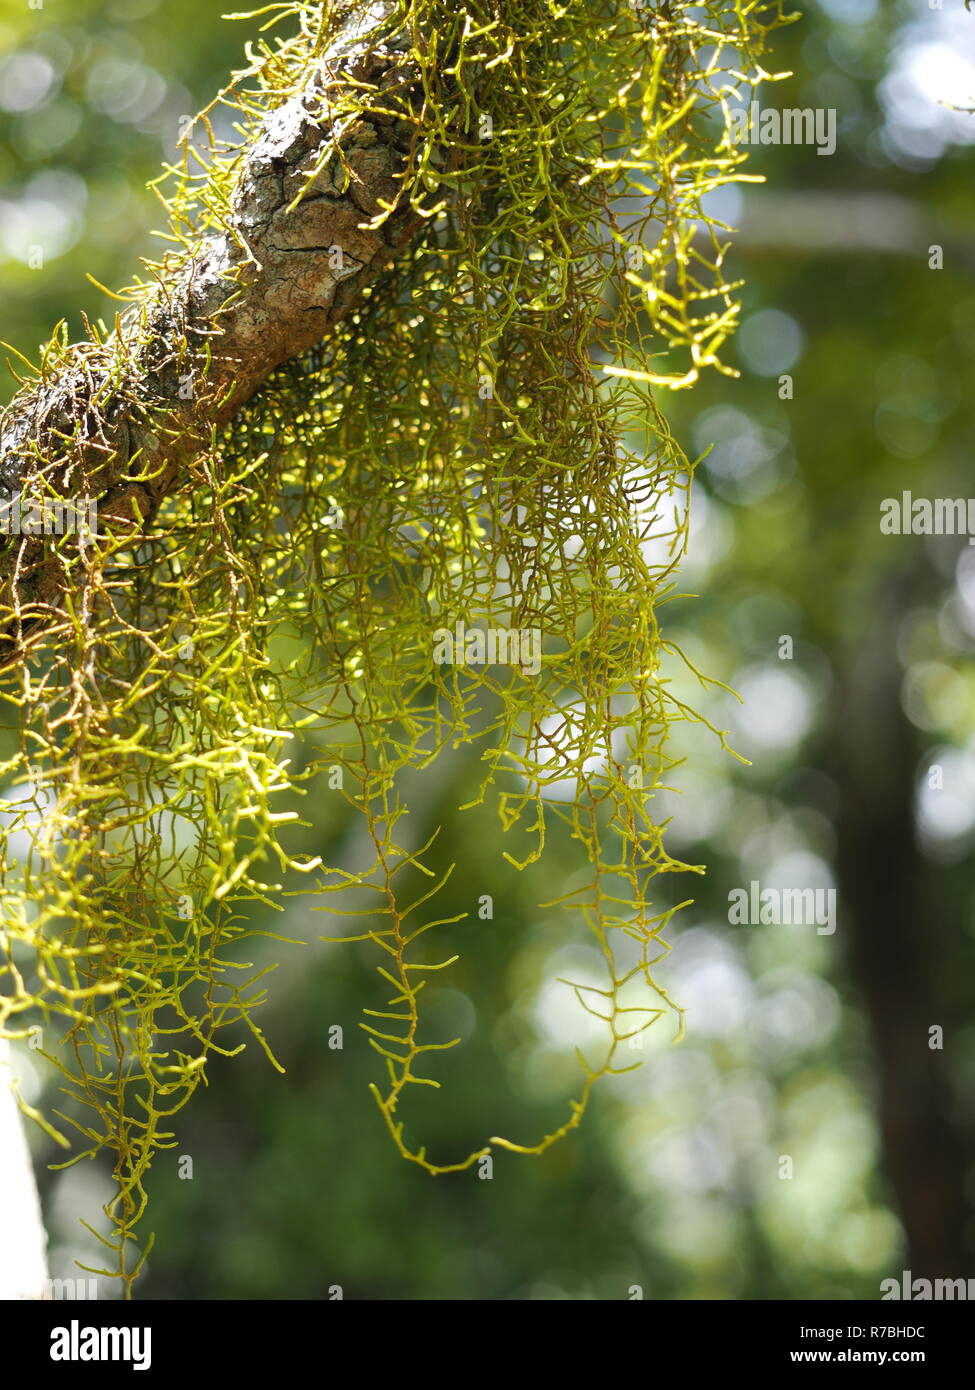 Lichen growing on a tree branch in a forest. Stock Photo